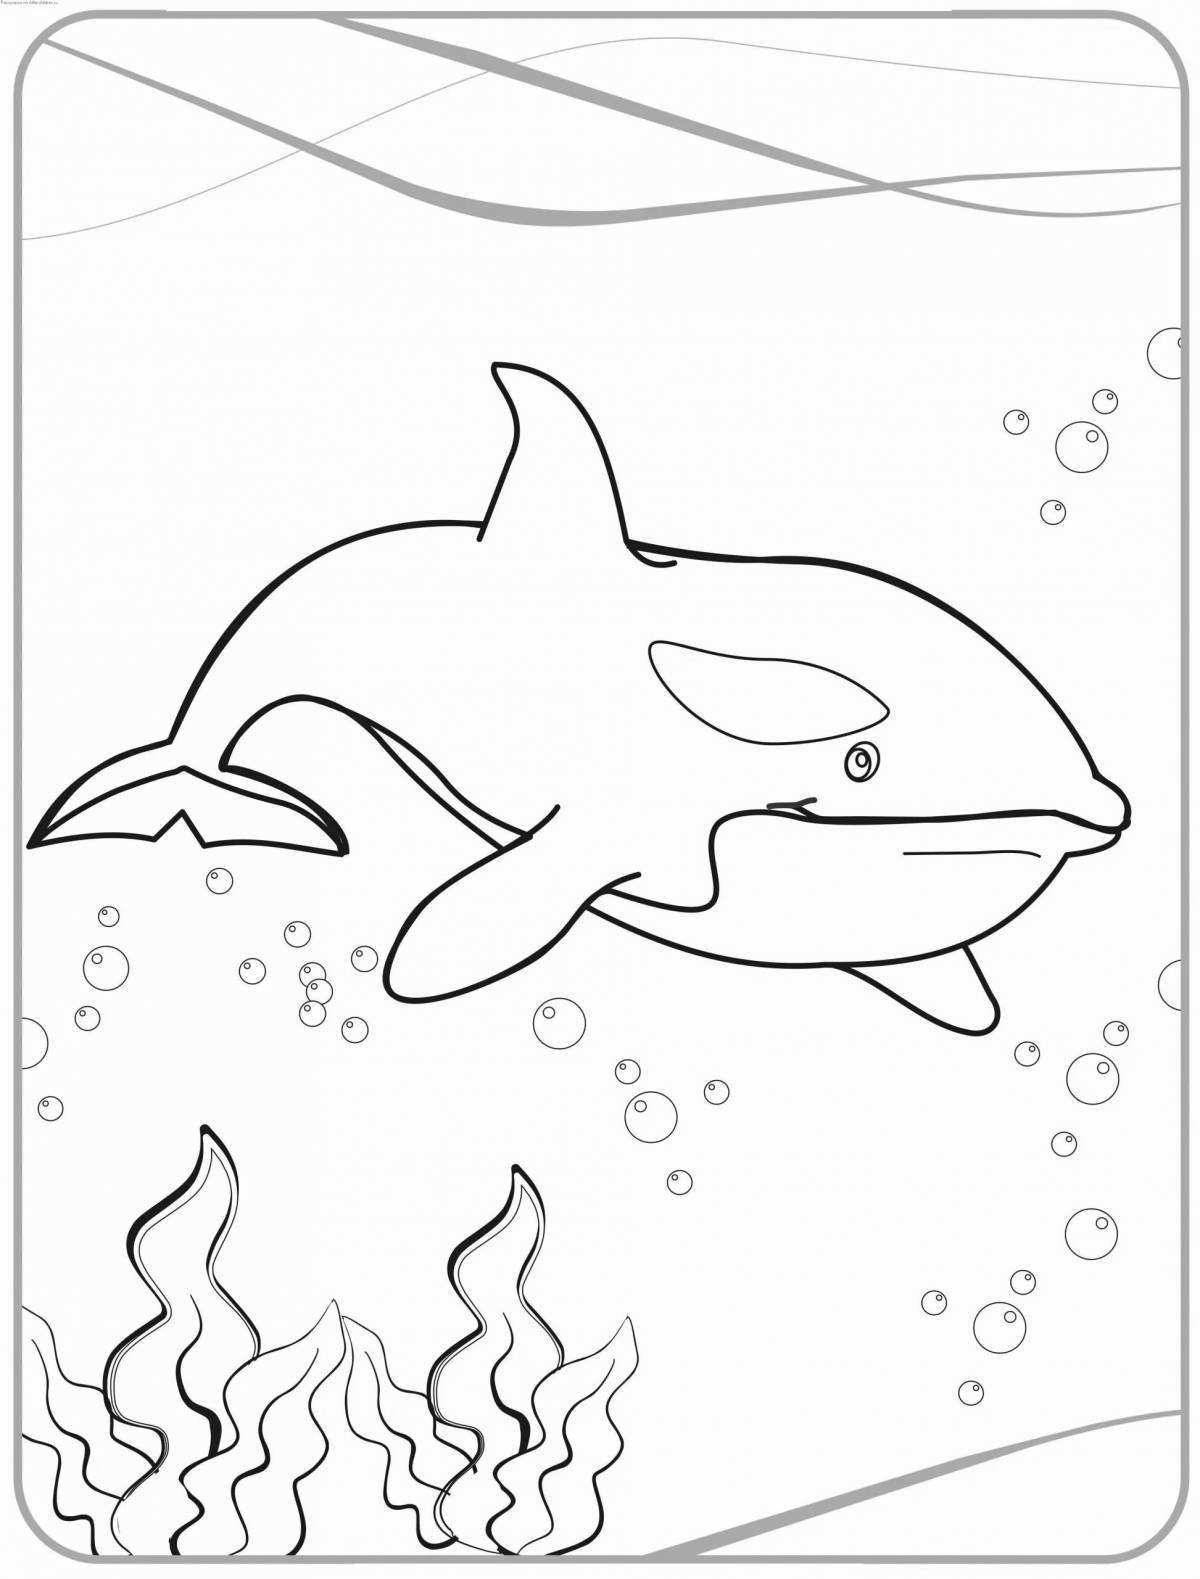 Large killer whale coloring page